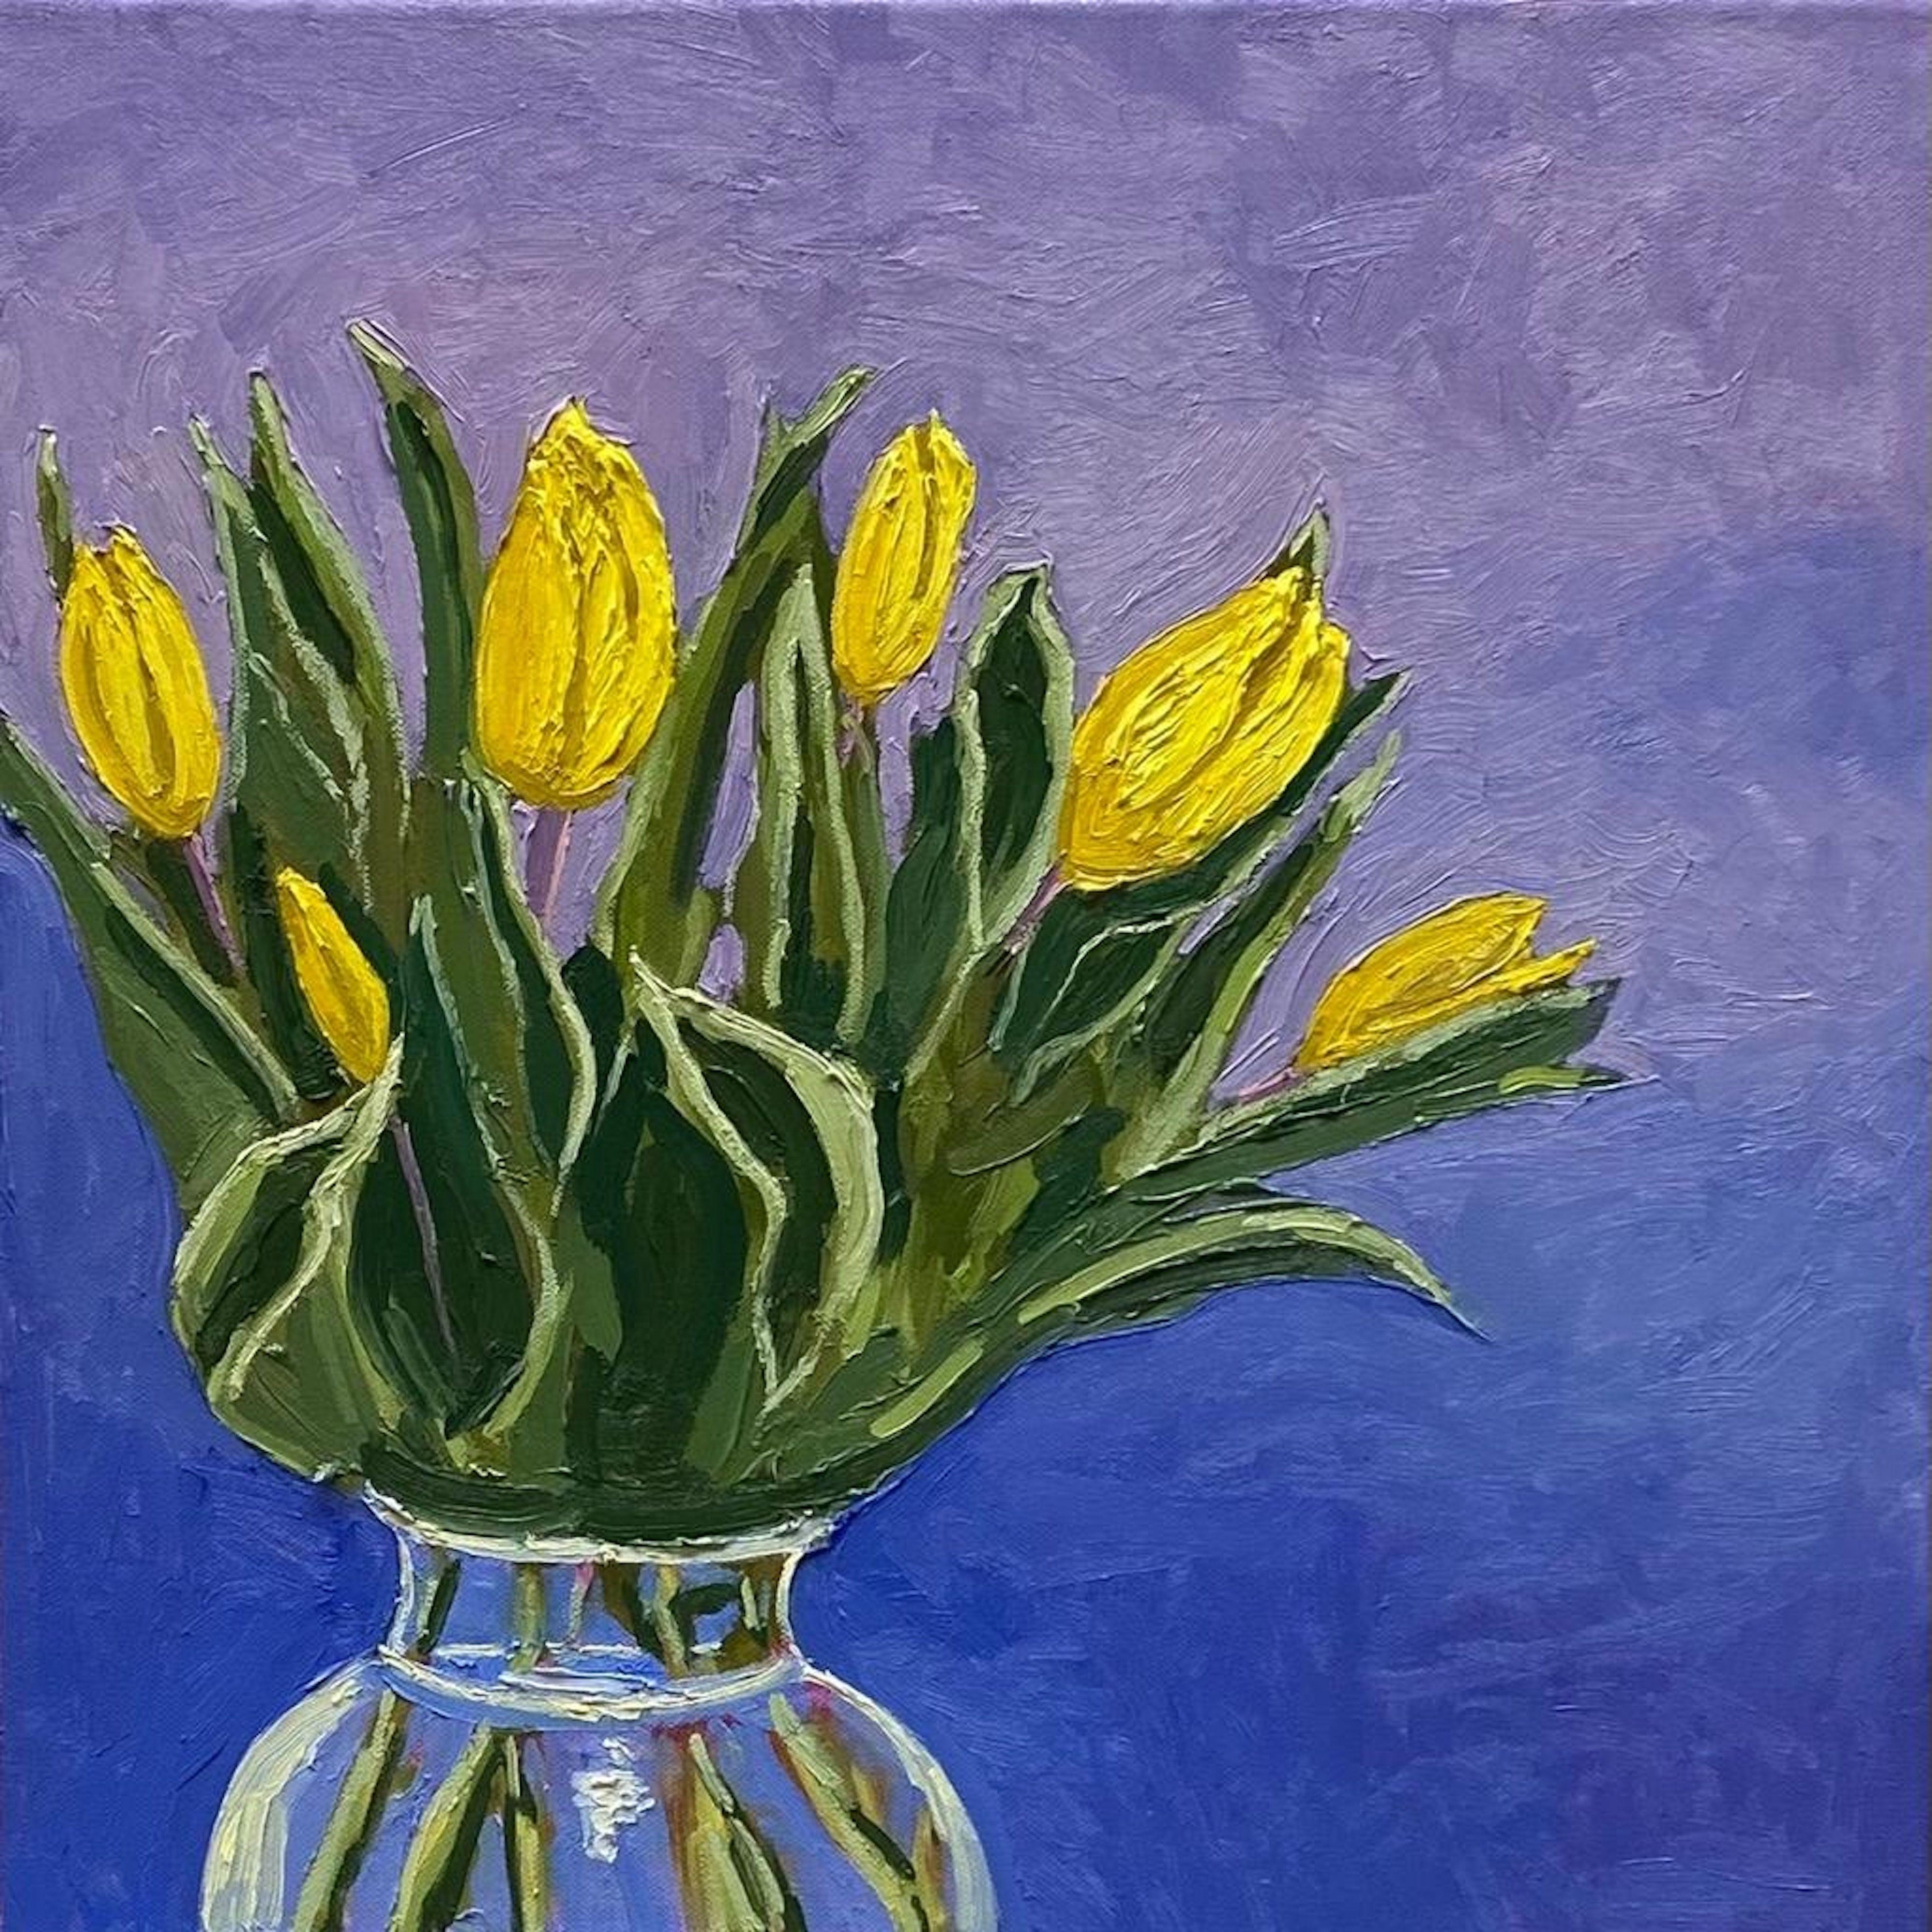 During a get-together with the group "Gary and the Piece makers", I painted this still life in my studio. We all sketched the tulips first. Following that, I decided to capture this beautiful spring bouquet in a painting. I had a great deal of fun